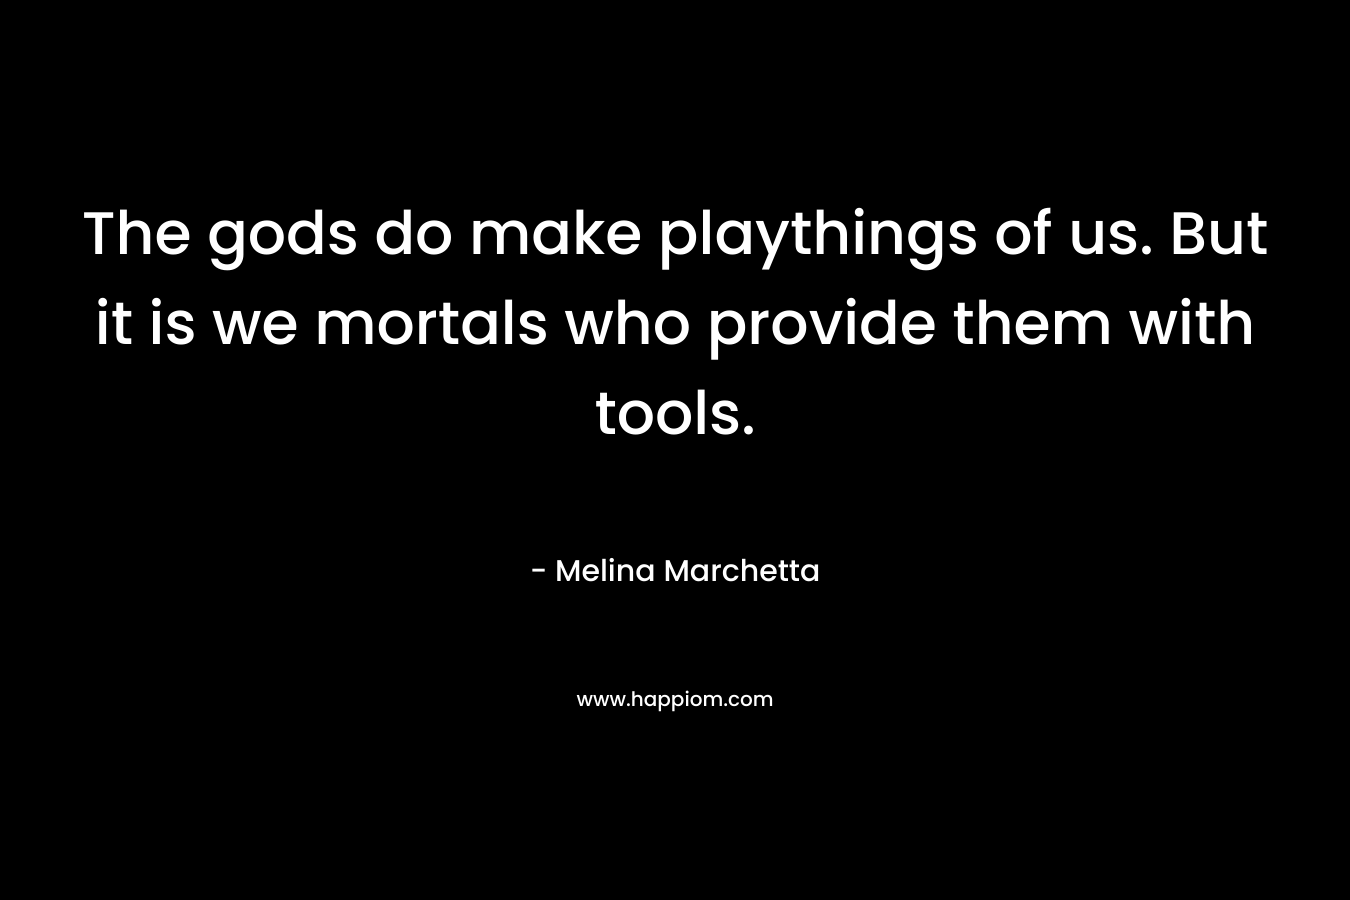 The gods do make playthings of us. But it is we mortals who provide them with tools. – Melina Marchetta